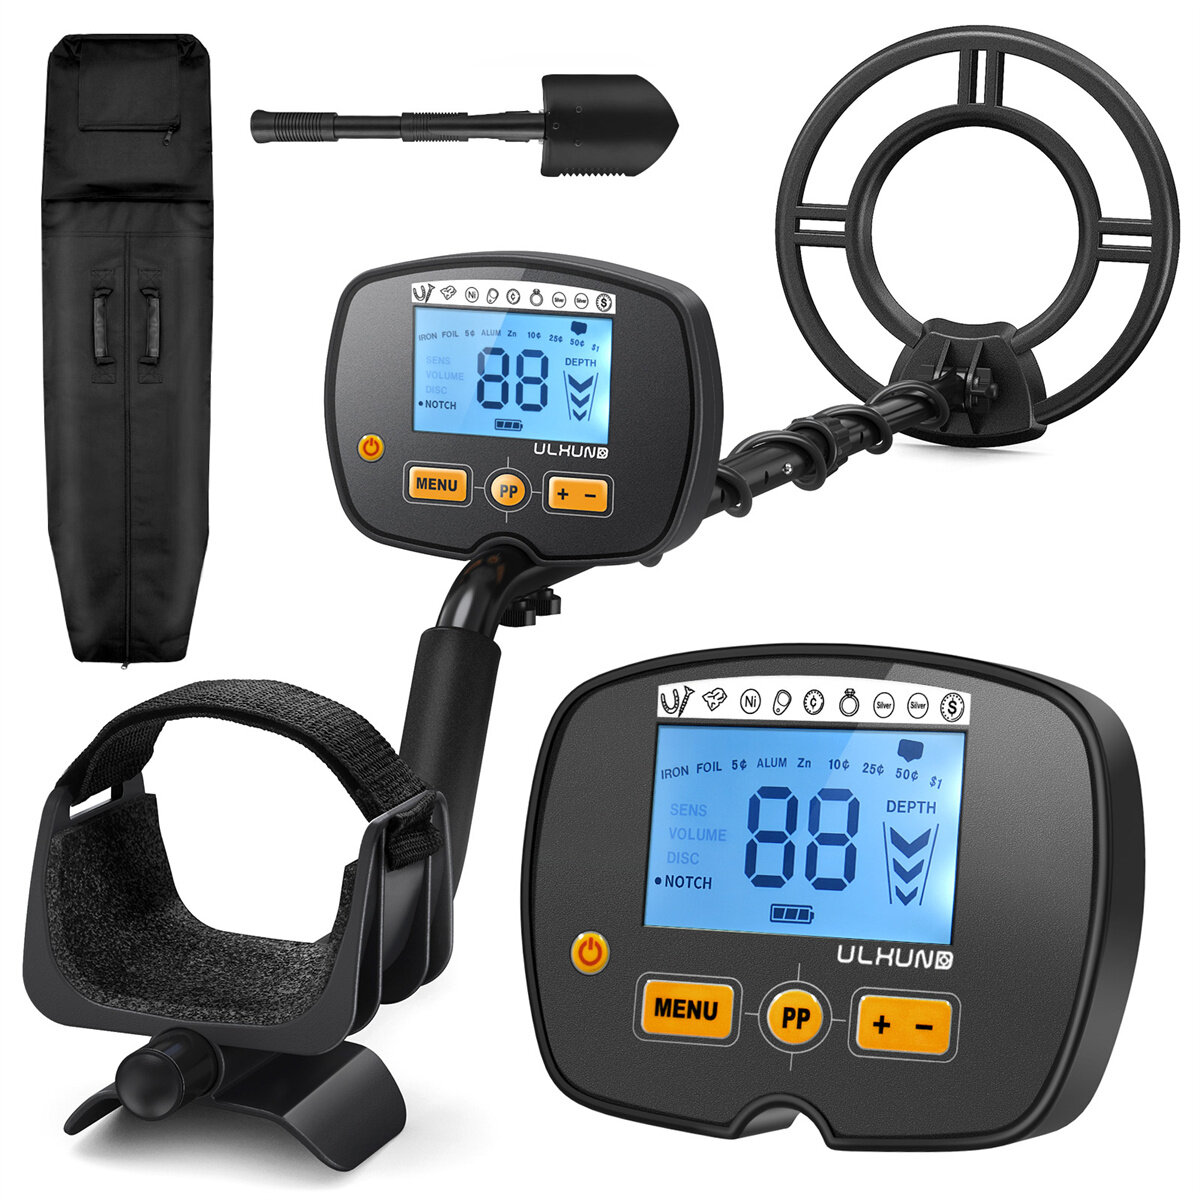 USA Direct GC1071 Metal Detector Waterproof IP68 with Advanced DSP Chip 10 Inch Coil 5 Search Modes LCD Display Best Gol